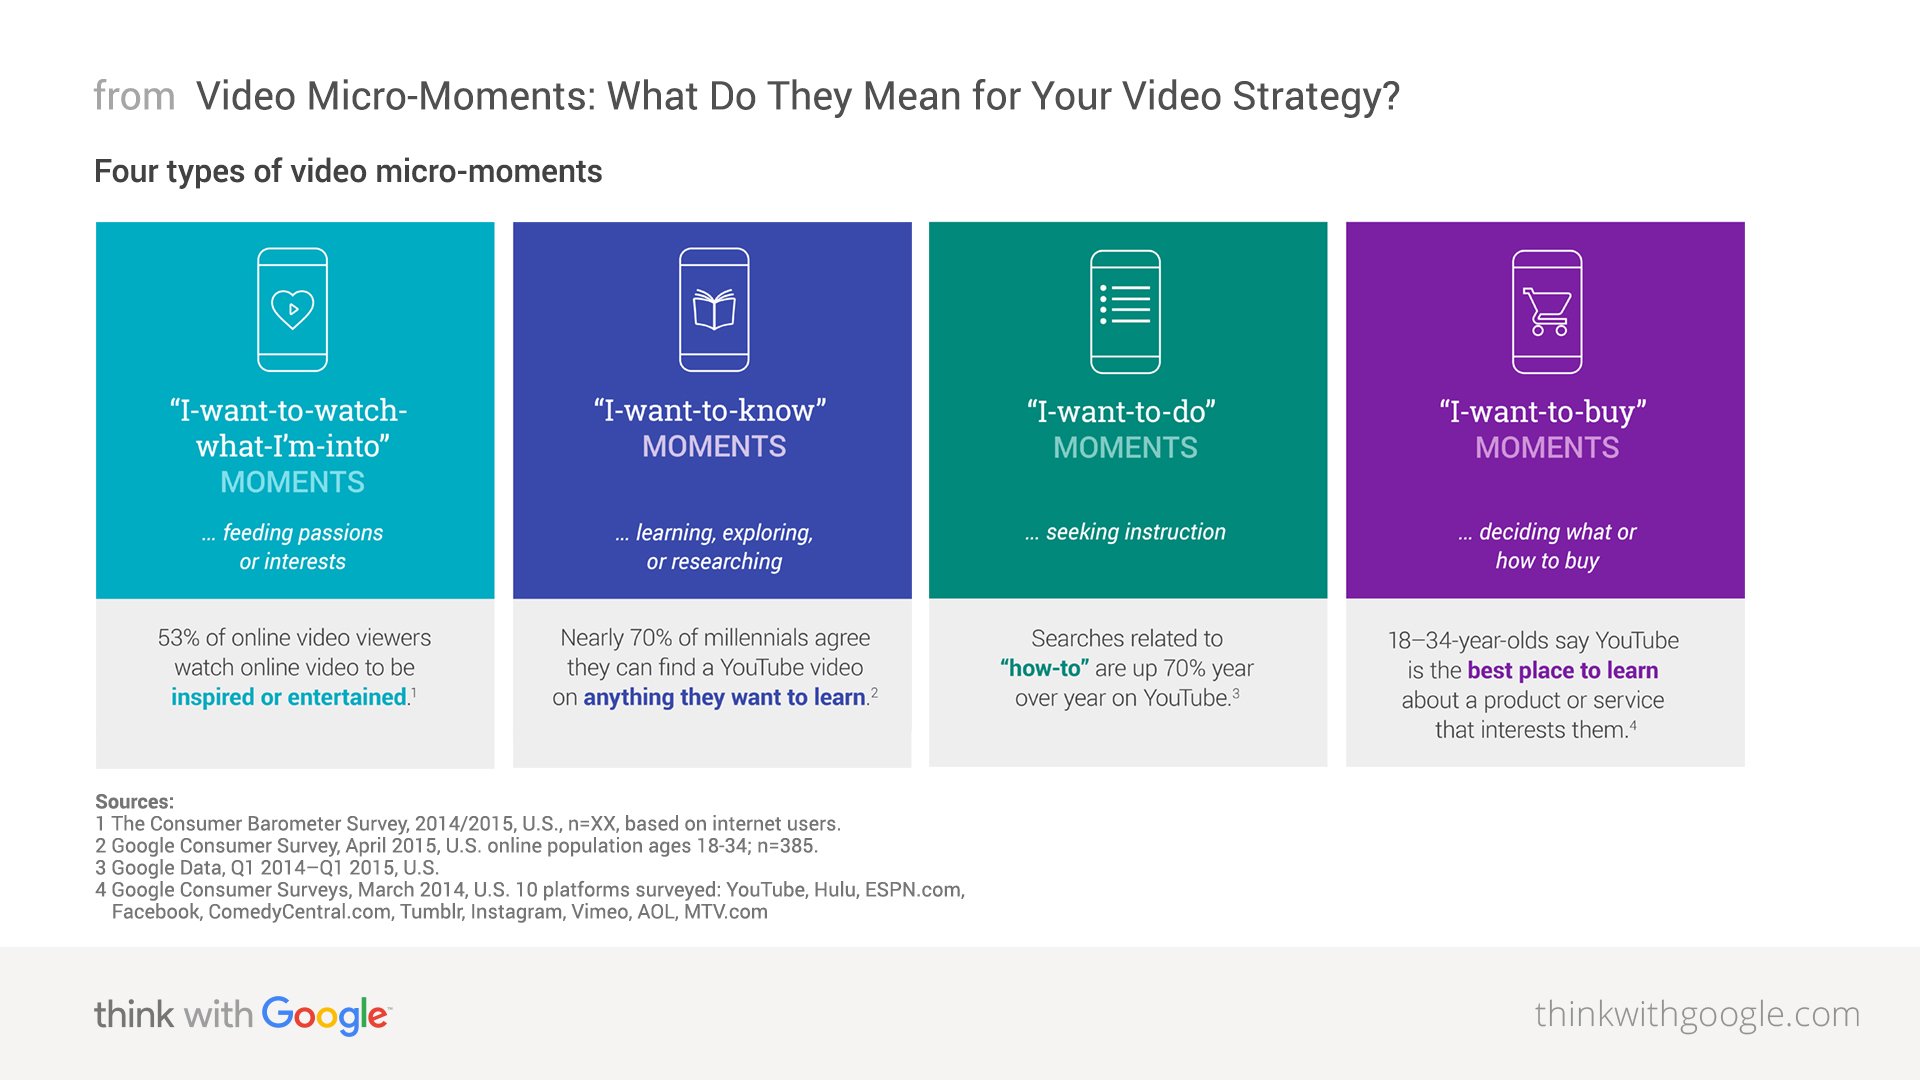 video-micro-moments-what-do-they-mean-for-your-strategy-download-nugget